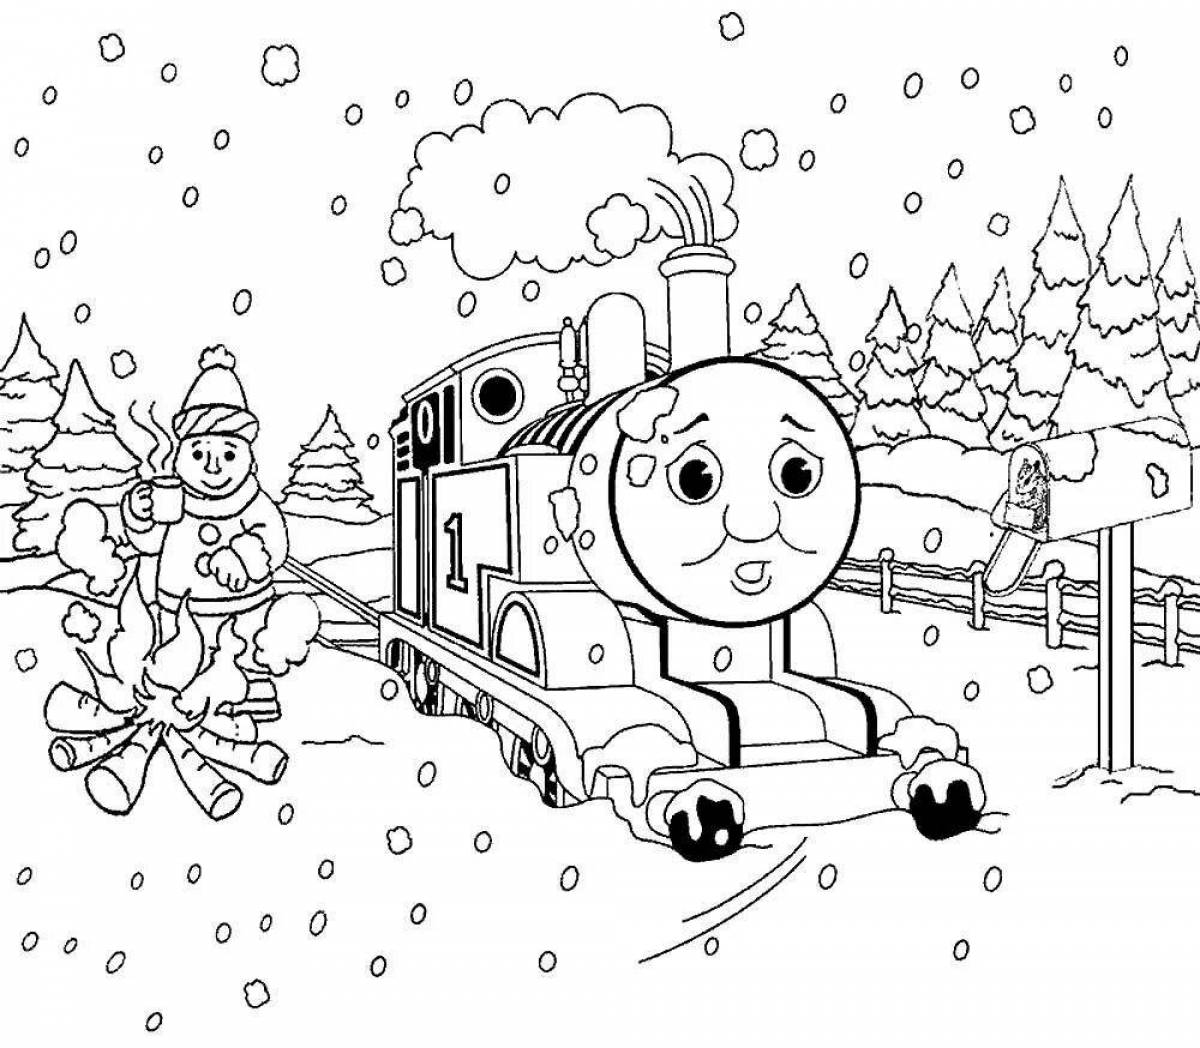 Exciting Christmas train coloring